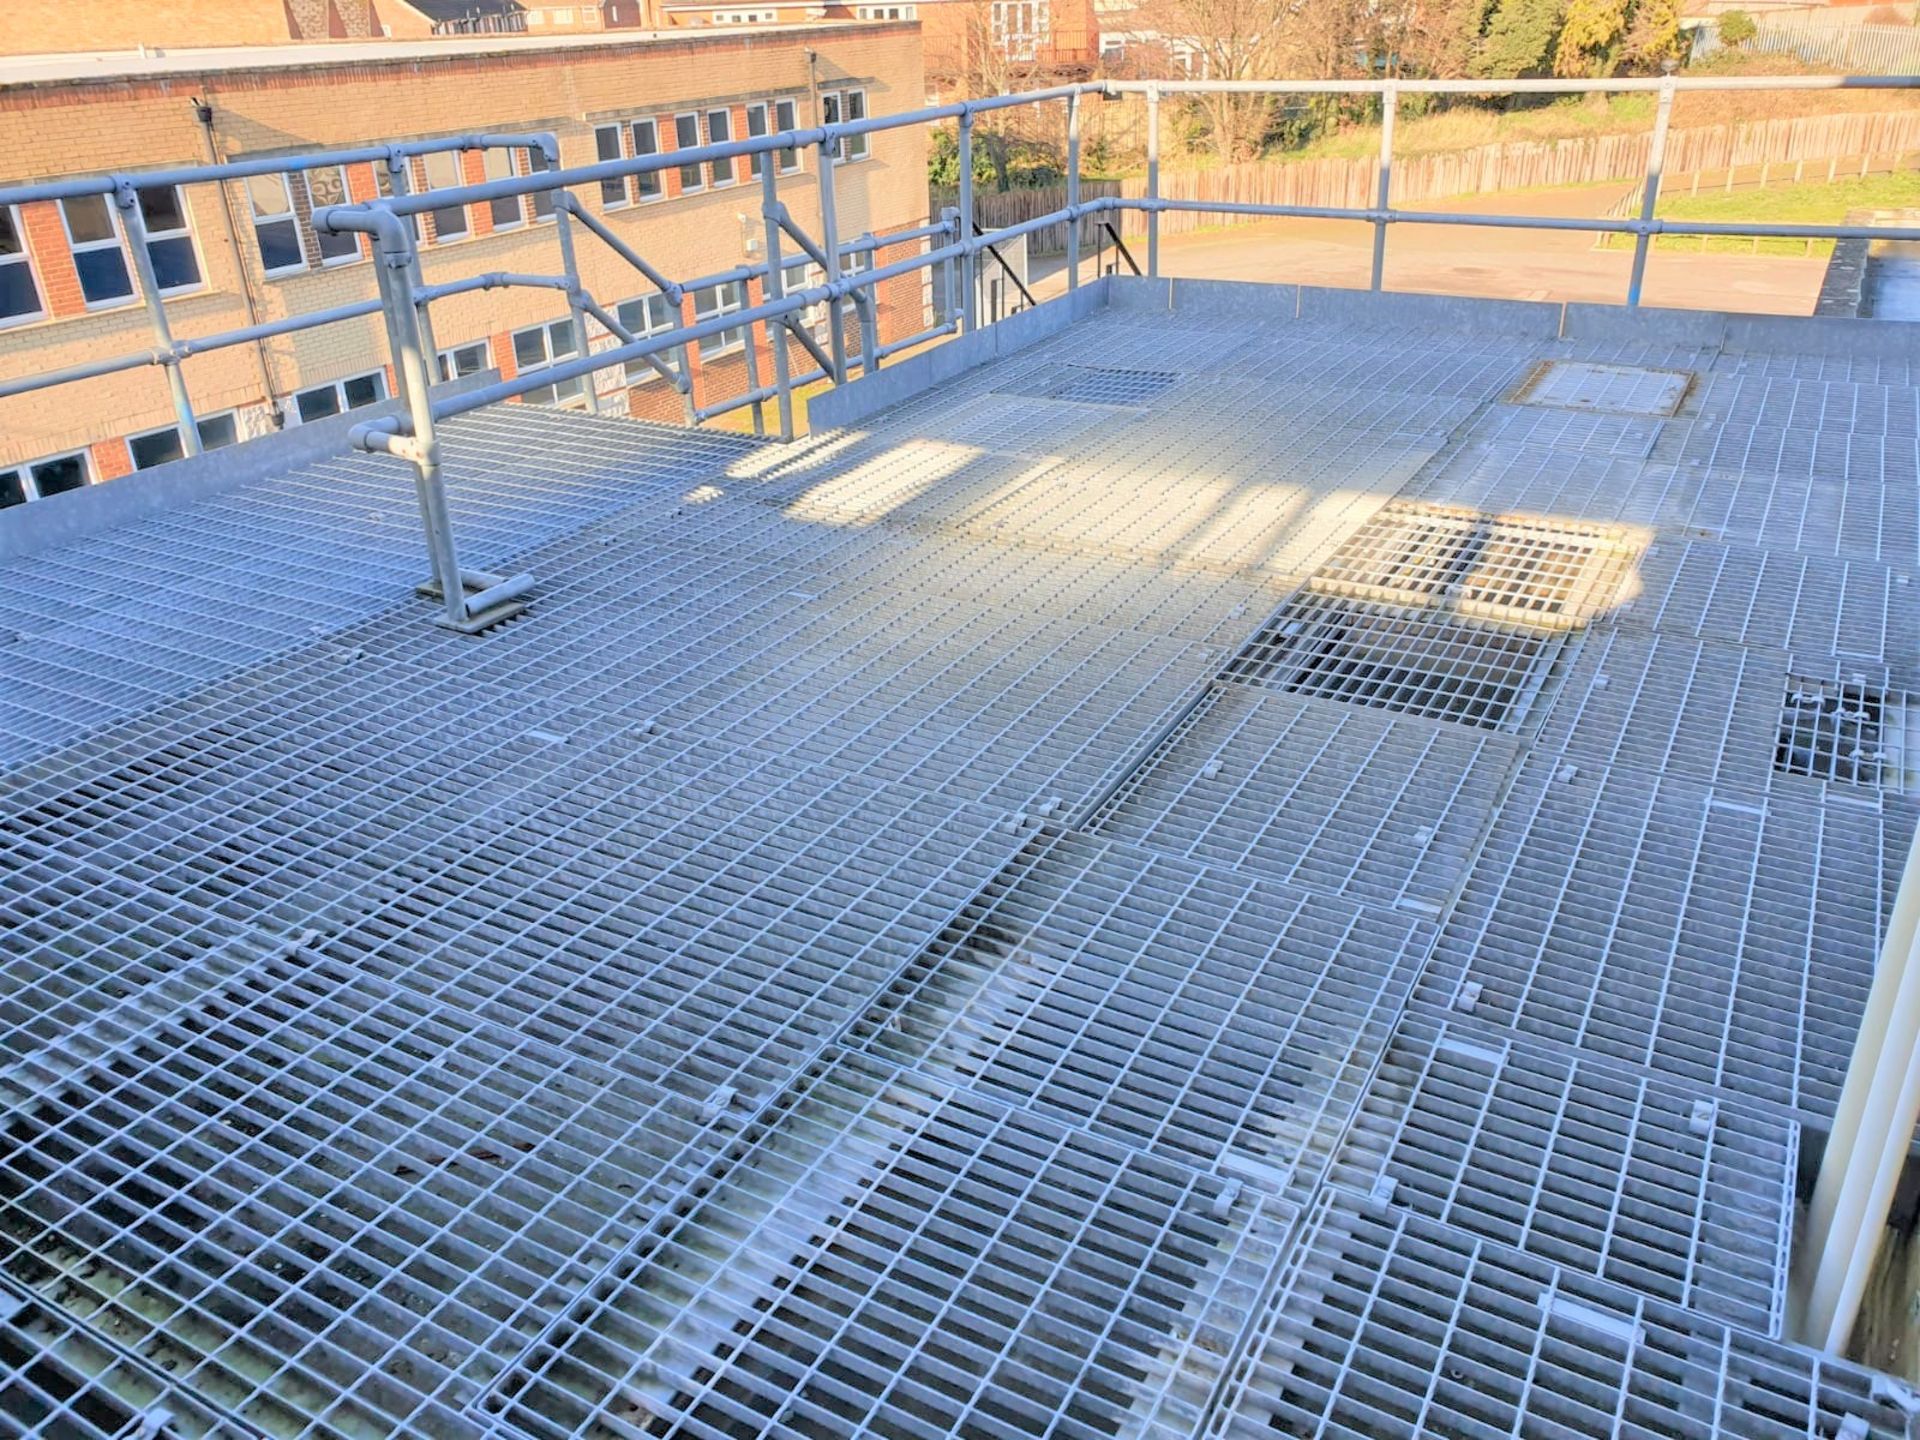 1 x Outdoor Rooftop Mezzanine Floor With Grid Anti Slip Floor Surface and Safety Hand Rails -